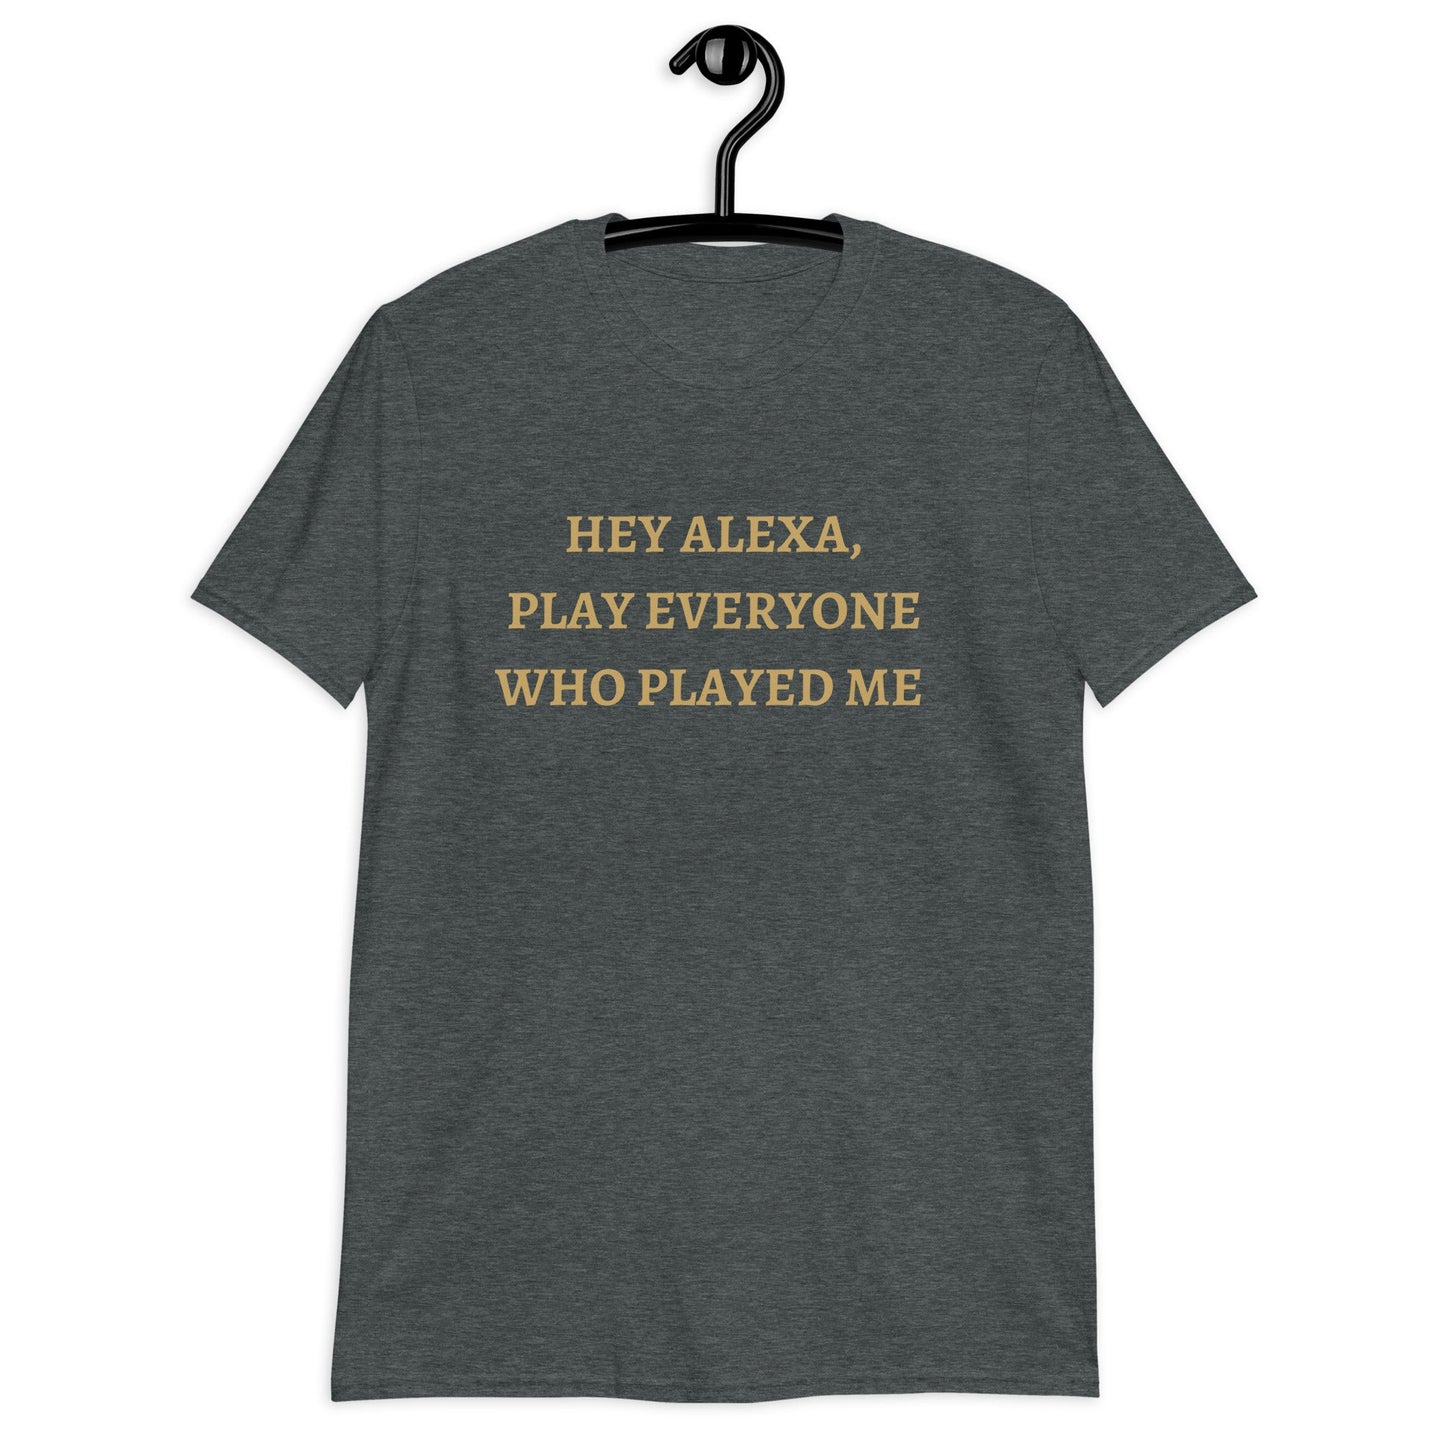 Alexa Play, Everyone Who Played Me (For a Slim Fit Order A Size Down) - Catch This Tea Shirts